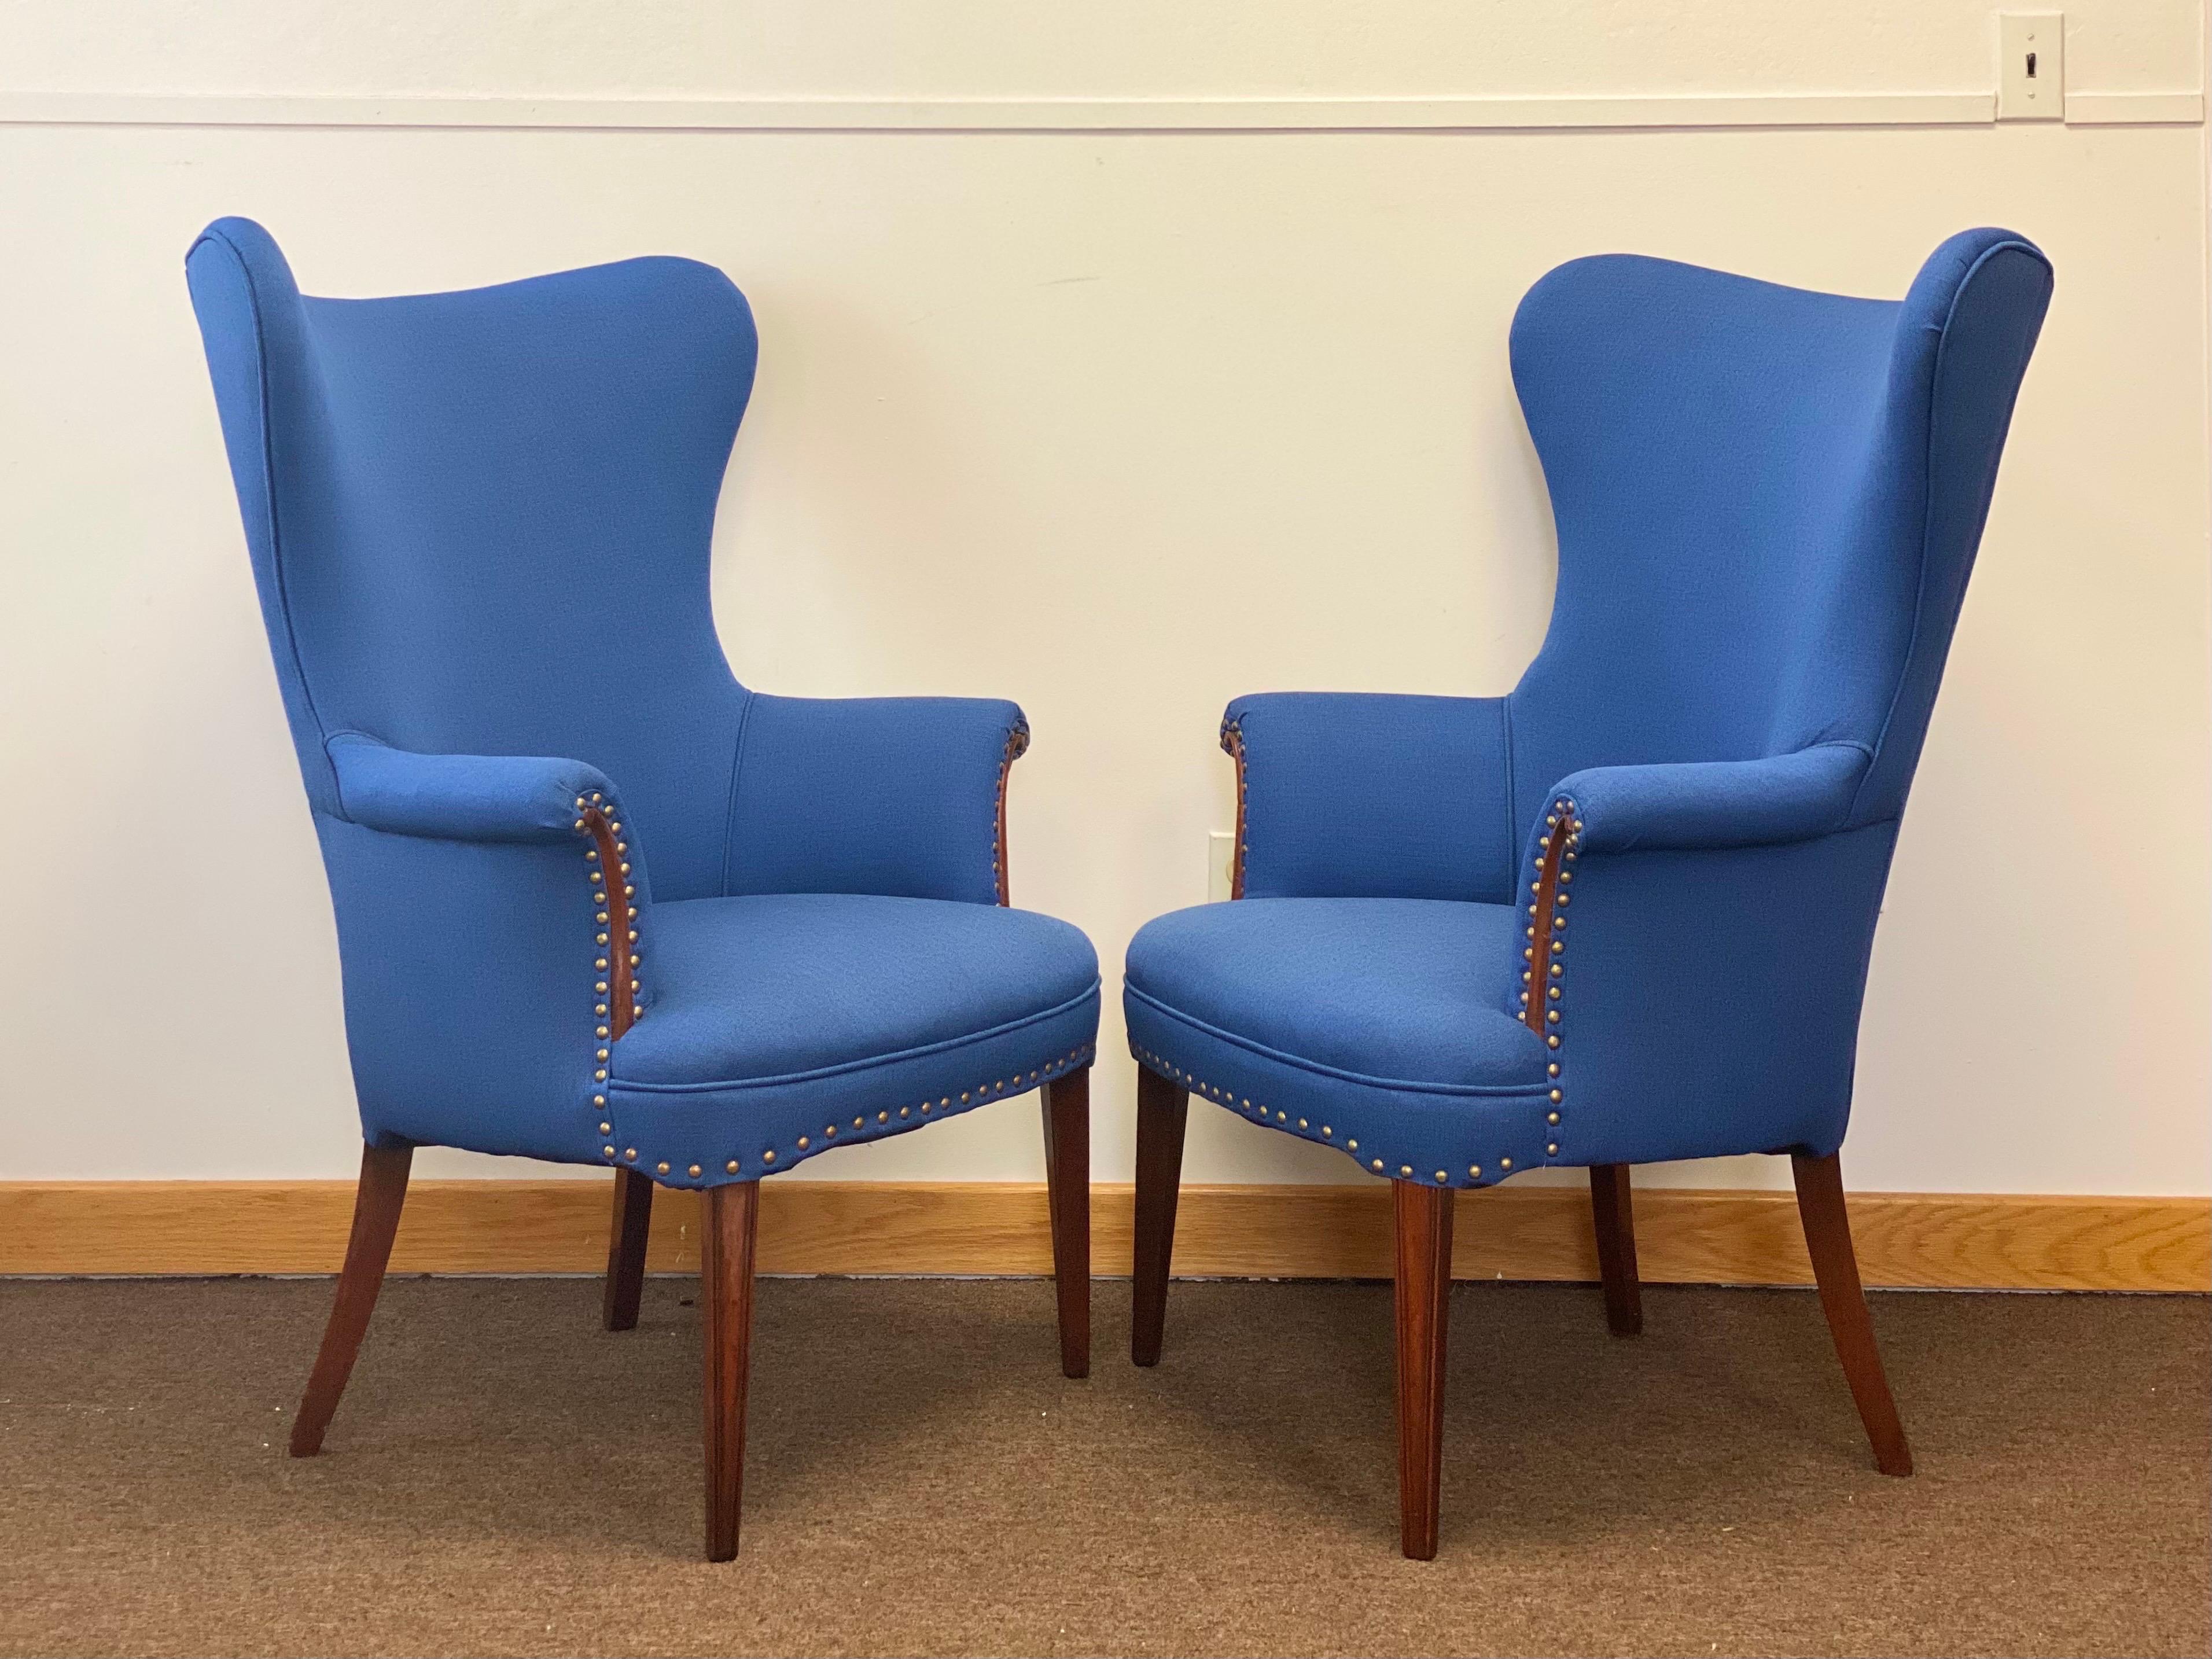 Mid-20th Century 1950s Mid-Century Modern Butterfly Royal Blue Wingback Chairs, a Pair